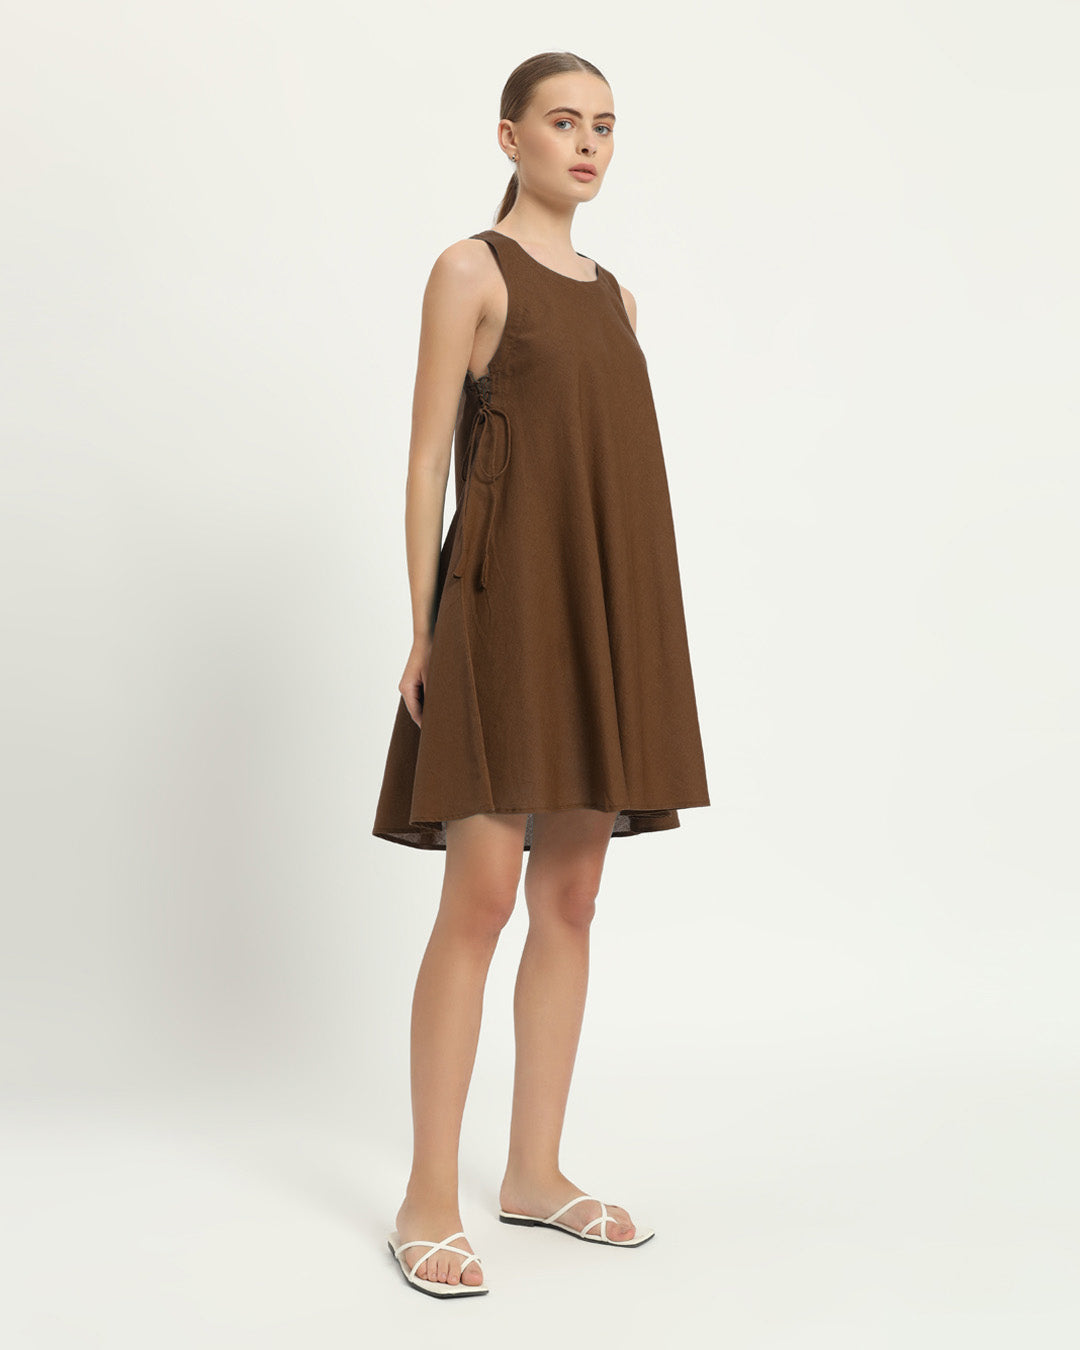 The Rhede Nutshell Cotton Dress